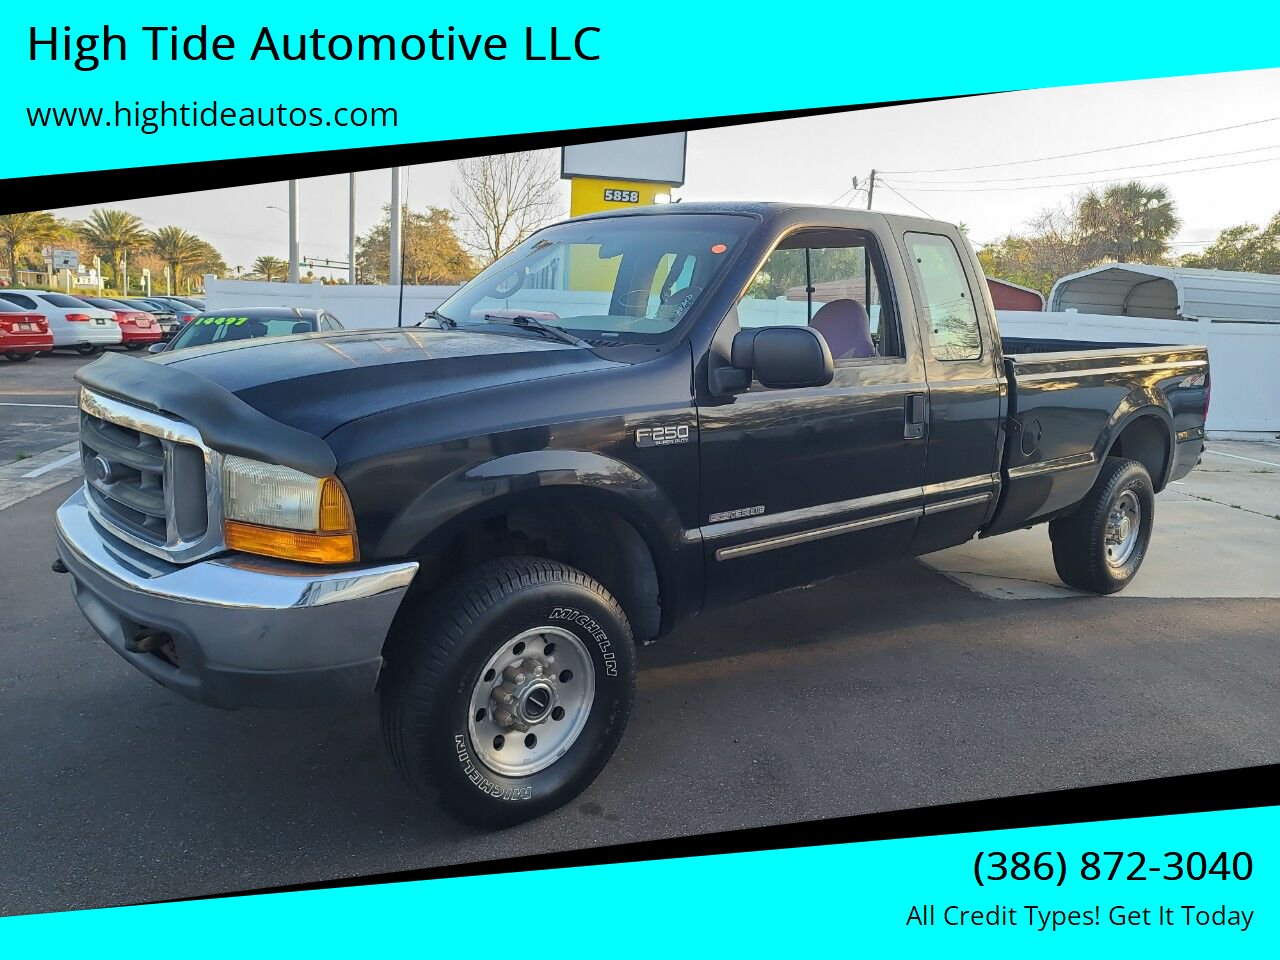 1999 Ford F-250 For Sale - Carsforsale.com®